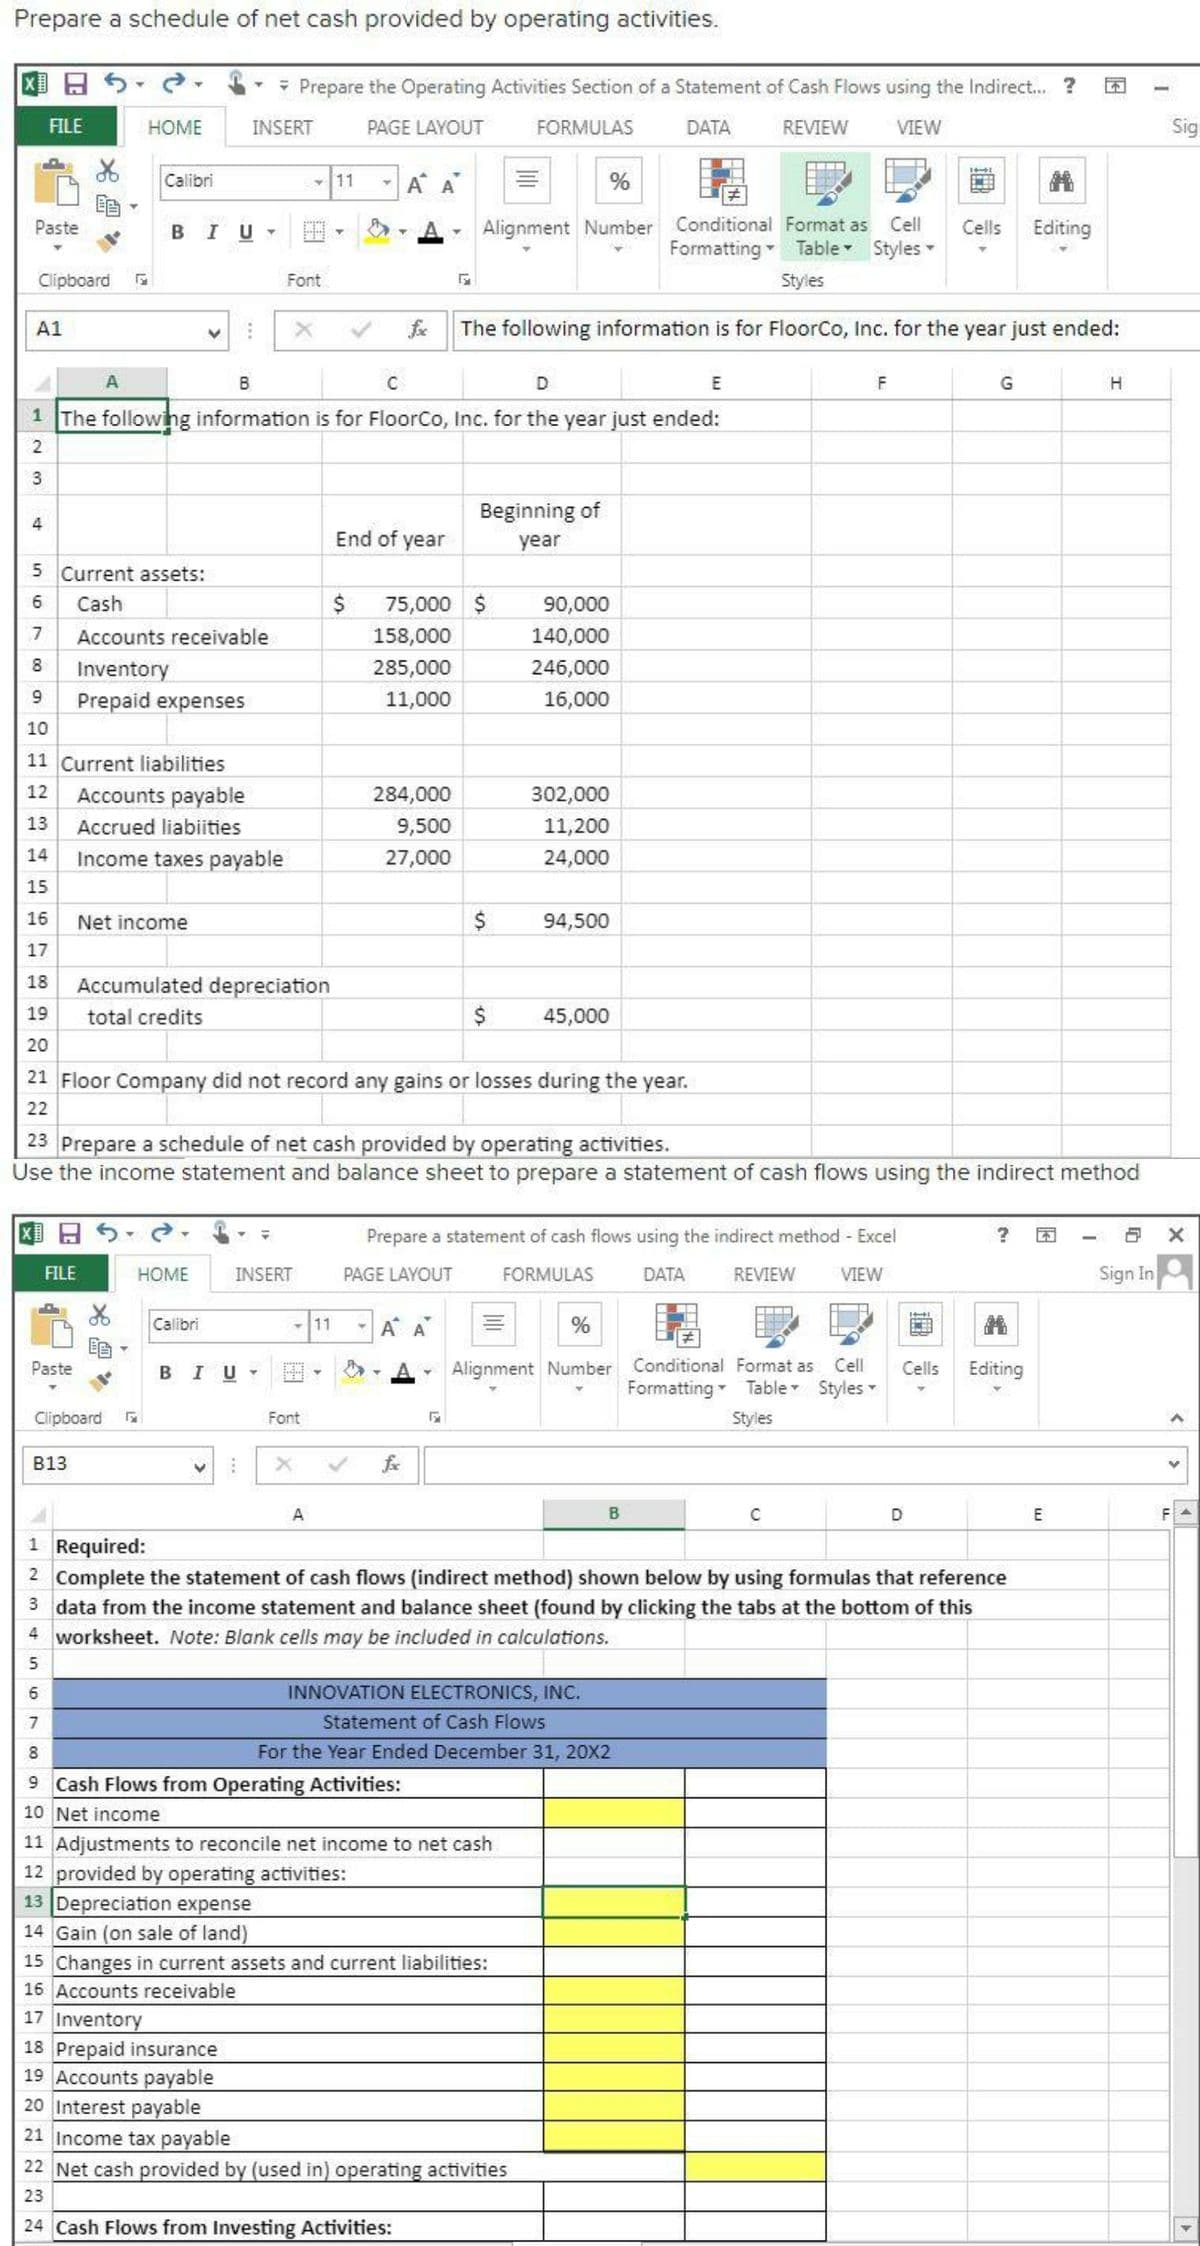 Prepare a schedule of net cash provided by operating activities.
- Prepare the Operating Activities Section of a Statement of Cash Flows using the Indirect. ?
FILE
HOME
INSERT
PAGE LAYOUT
FORMULAS
DATA
REVIEW
VIEW
Sig
Calibri
-11
A A
%
Alignment Number Conditional Format as Cell
Formatting Table Styles
Paste
BIU
Cells
Editing
Clipboard
Font
Styles
A1
fe
The following information is for FloorCo, Inc. for the year just ended:
A
B
D
E
G
1 The followng information is for FloorCo, Inc. for the year just ended:
3
Beginning of
4
End of year
year
5 Current assets:
Cash
75,000 $
90,000
7.
Accounts receivable
158,000
140,000
8
Inventory
285,000
246,000
9.
Prepaid expenses
11,000
16,000
10
11 Current liabilities
12
Accounts payable
284,000
302,000
13
Accrued liabiities
9,500
11,200
14
Income taxes payable
27,000
24,000
15
16
Net income
2$
94,500
17
18
Accumulated depreciation
19
total credits
45,000
20
21 Floor Company did not record any gains or losses during the year.
22
23 Prepare a schedule of net cash provided by operating activities.
Use the income statement and balance sheet to prepare a statement of cash flows using the indirect method
Prepare a statement of cash flows using the indirect method - Excel
FILE
HOME
INSERT
PAGE LAYOUT
FORMULAS
DATA
REVIEW
VIEW
Sign In
Calibri
-11
A A
%
Paste
BIU
Alignment Number
Conditional Format as
Cell
Cells
Editing
Formatting Table Styles
Clipboard
Font
Styles
B13
fe
A
B
D
E
F
1 Required:
2 Complete the statement of cash flows (indirect method) shown below by using formulas that reference
3 data from the income statement and balance sheet (found by clicking the tabs at the bottom of this
4 worksheet. Note: Blank cells may be included in calculations.
INNOVATION ELECTRONICS, INC.
Statement of Cash Flows
8.
For the Year Ended December 31, 20X2
9 Cash Flows from Operating Activities:
10 Net income
11 Adjustments to reconcile net income to net cash
12 provided by operating activities:
13 Depreciation expense
14 Gain (on sale of land)
15 Changes in current assets and current liabilities:
16 Accounts receivable
17 Inventory
18 Prepaid insurance
19 Accounts payable
20 Interest payable
21 Income tax payable
22 Net cash provided by (used in) operating activities
23
24 Cash Flows from Investing Activities:
>
67
